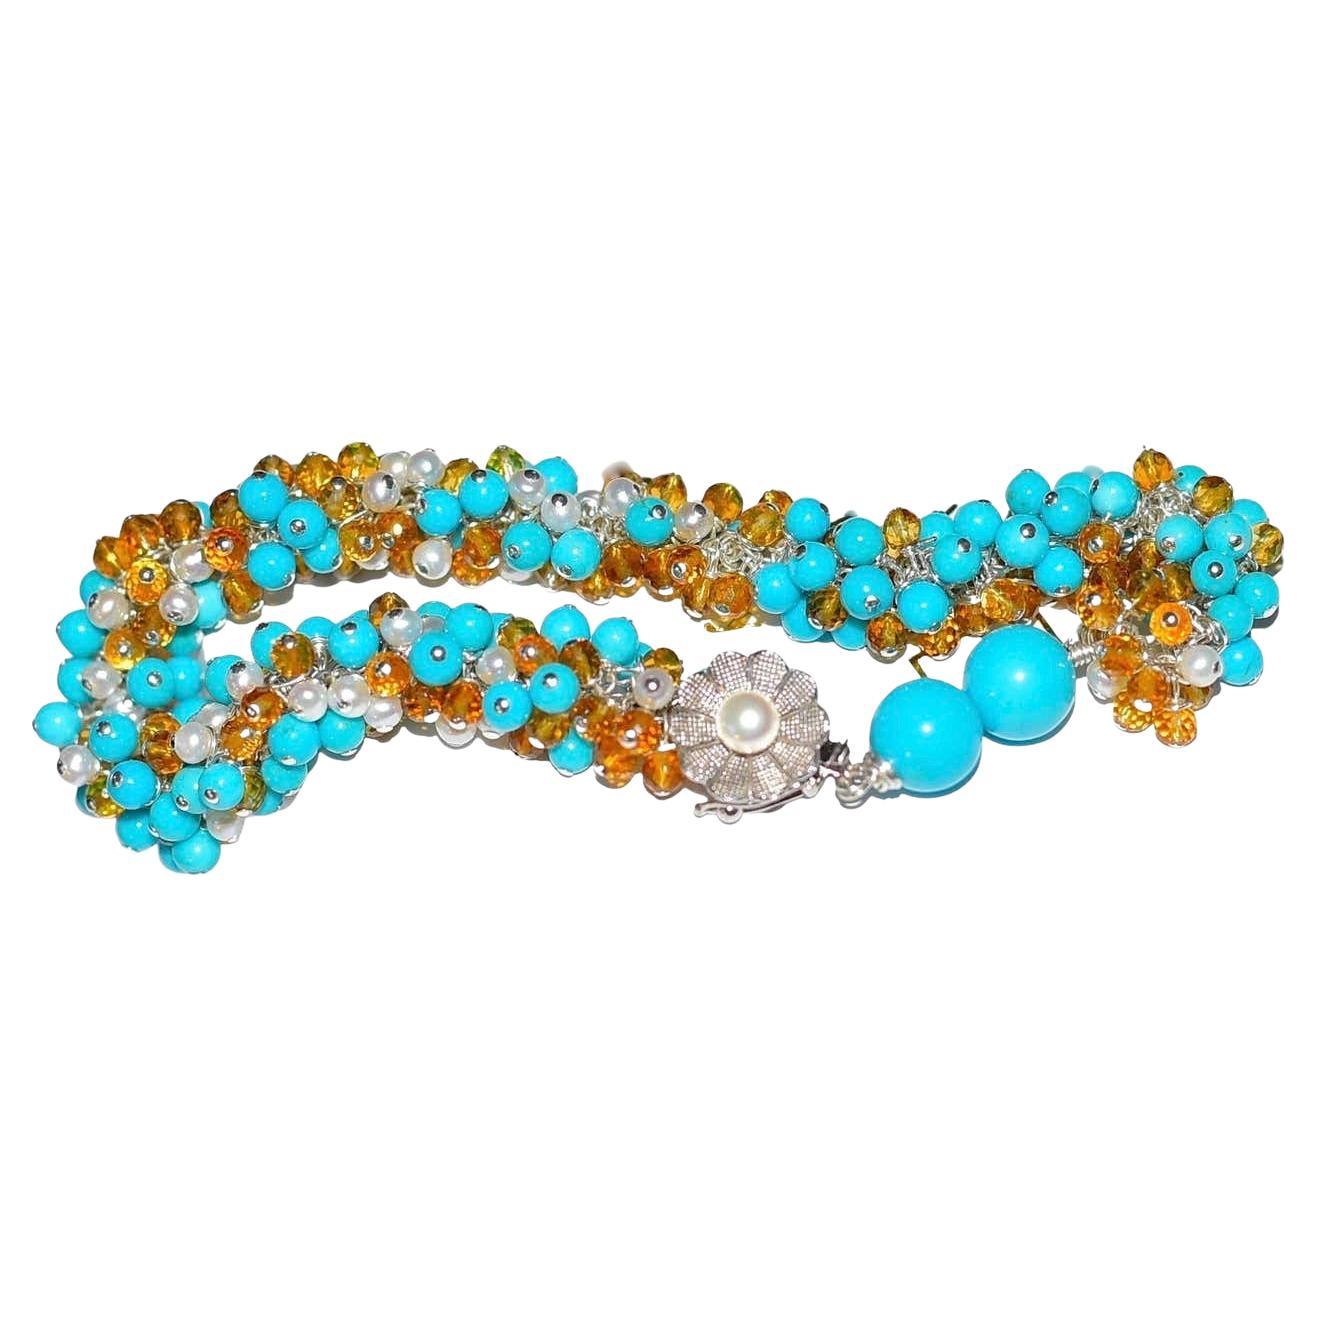 This is such a wonderful bracelet that I would be surprised if you returned it to me! 
Made with Sleeping Beauty Turquoise, Madeira Citrine, and White Seed pearls. 14K Solid White Gold clasp with pearl for decoration and to close.
Beautiful summer-,